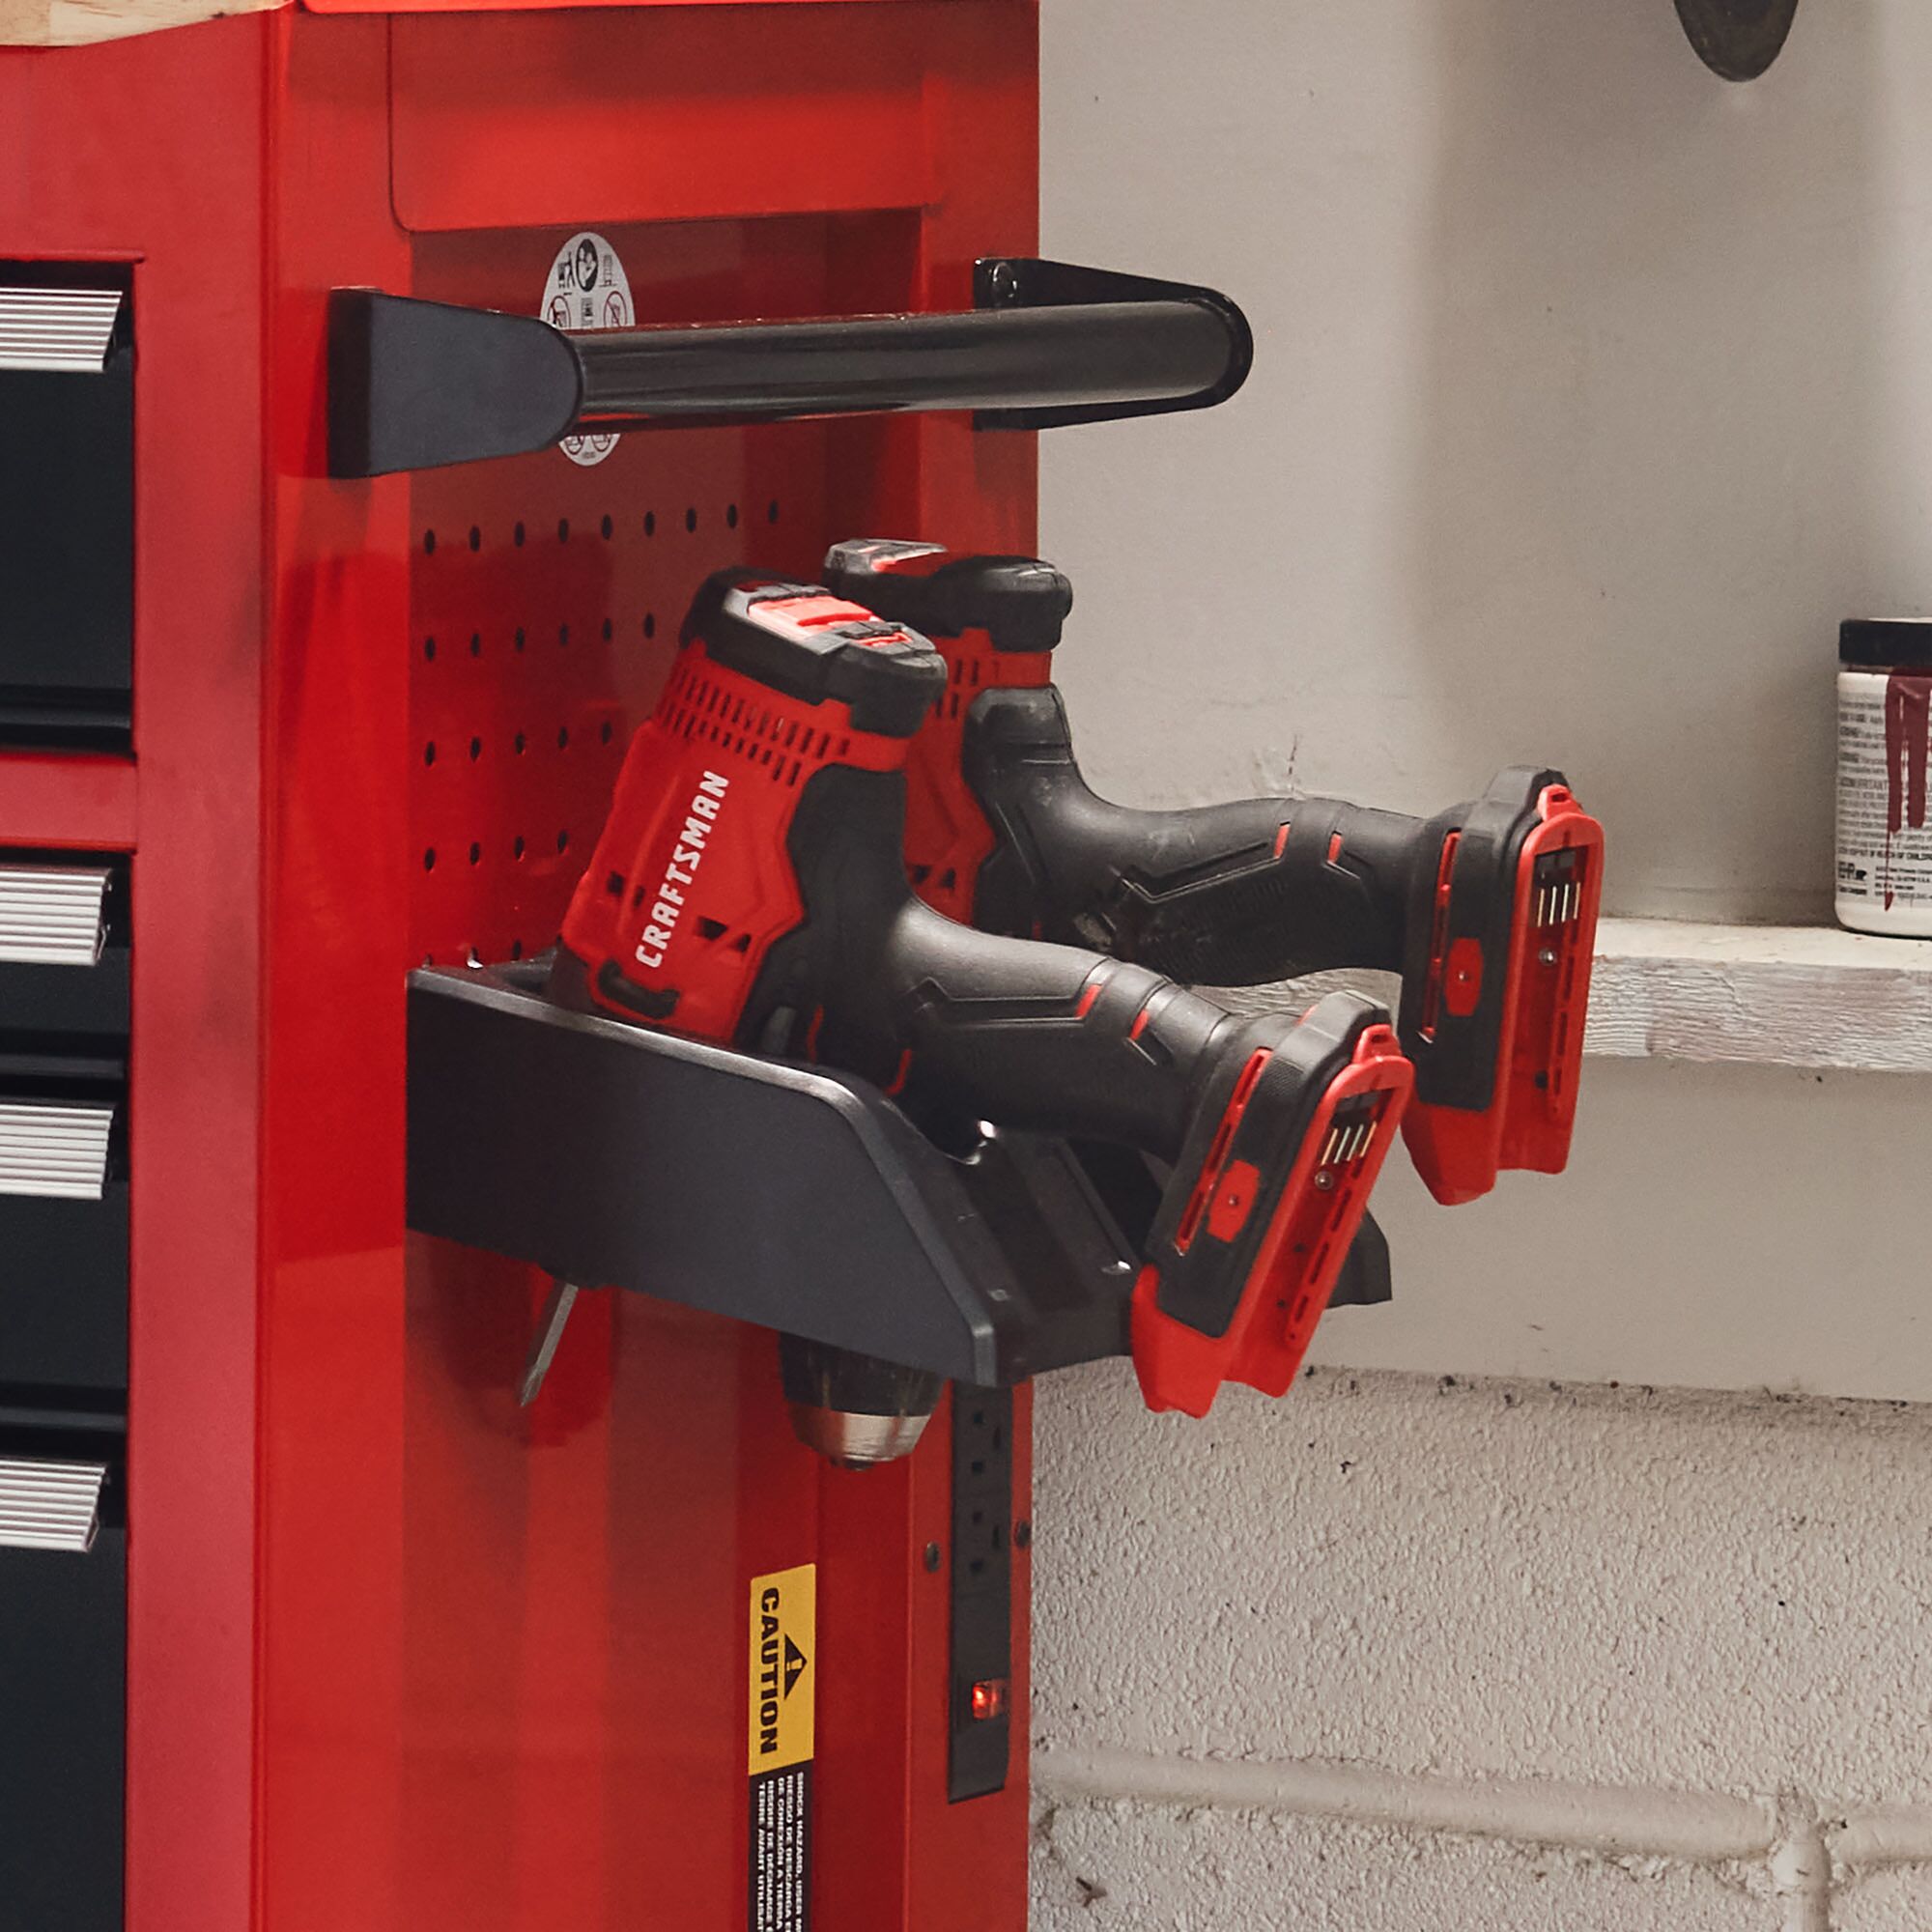 Close-up view of 2 CRAFTMAN® Drills stored in holder on side of metal storage cabinet